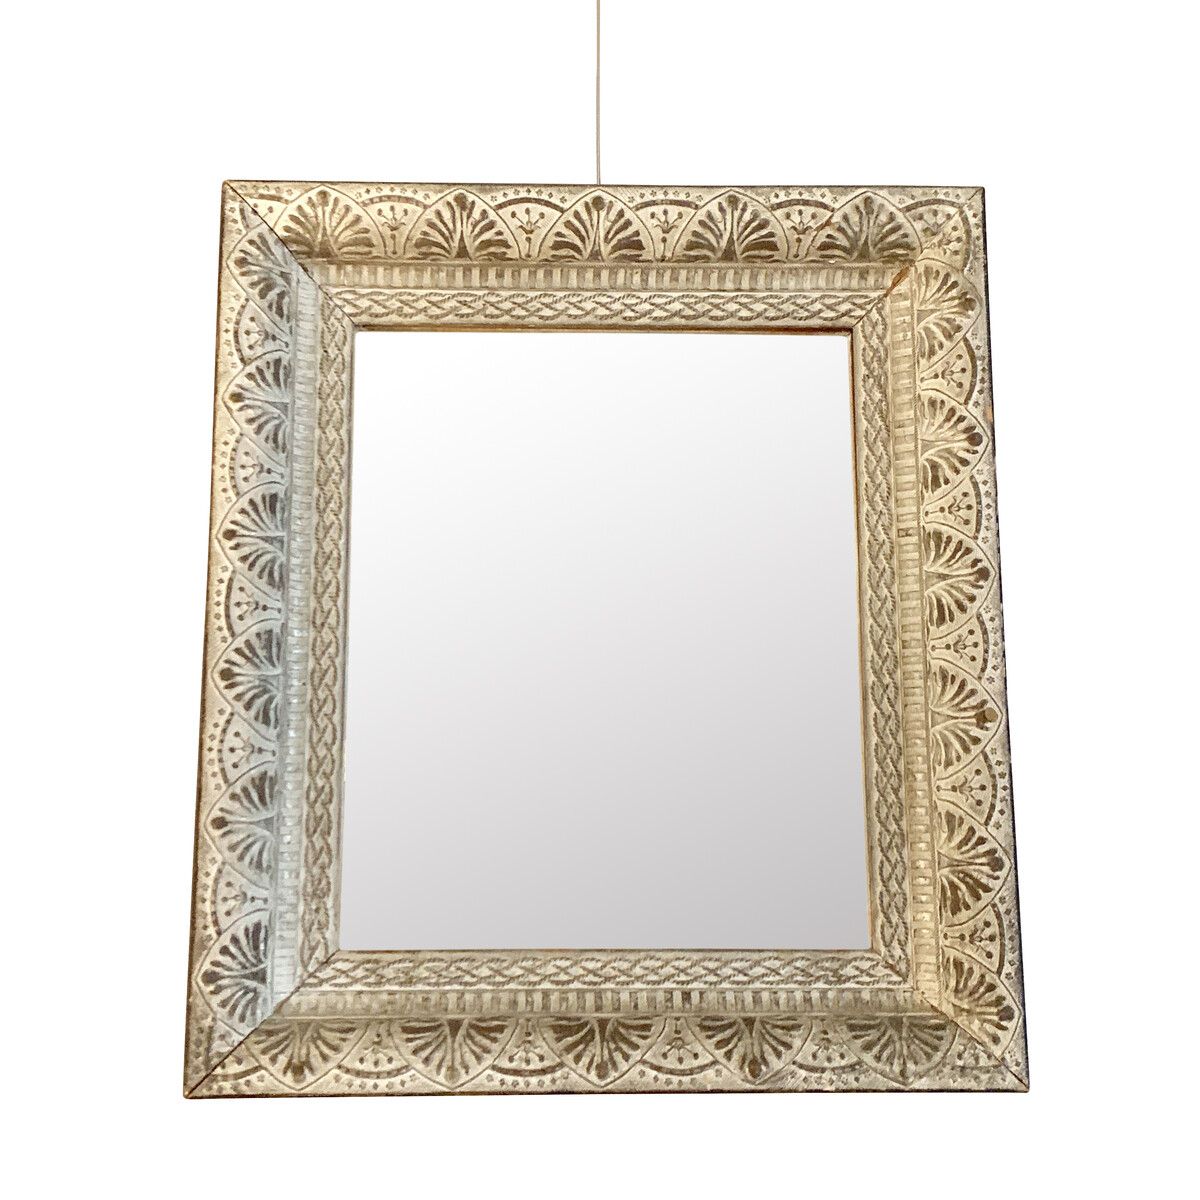 Balsamo Antiques | 1940's French Silver Leaf Framed Mirror Intended For Gold Leaf Floor Mirrors (View 5 of 15)